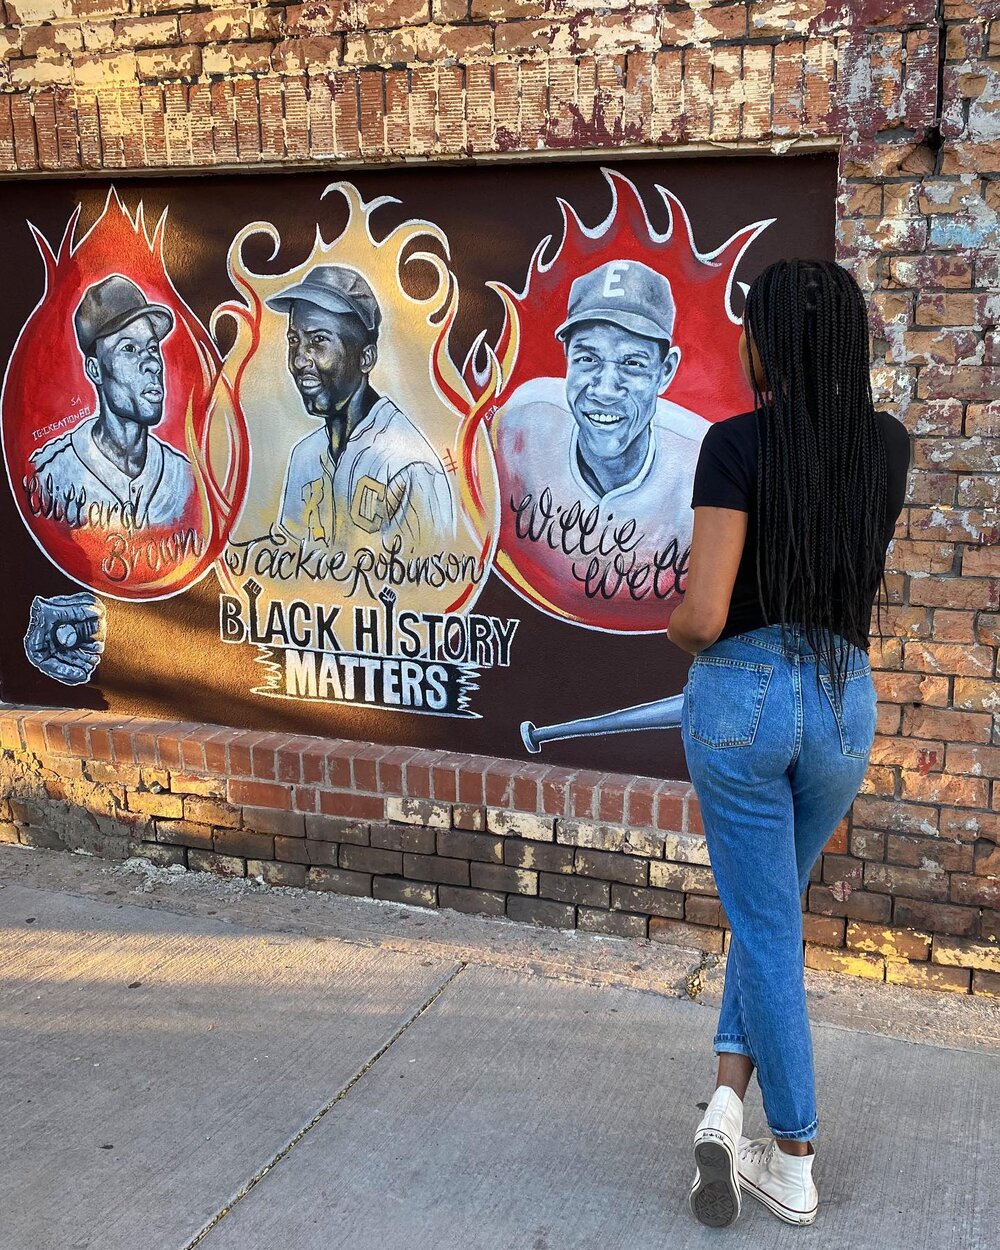 Phoenix Murals (Save+Share) 🤎

There is so much art in downtown Phoenix to explore, it&rsquo;s been a really fun part of the trip! If you&rsquo;re looking for murals that honor Black history and Black voices, these are a few you don&rsquo;t want to miss. 

📍Baseball Greats, Kobe &amp; Nipsey (on the sides of @loloschickenandwaffles) 

📍&rdquo; A New Hope&rdquo; feat. George Washington Carver painted by Estevan Curiel (415 E. Grant St.)

📍Black History Matters Mural (Talking Stick Arena)

📍 The Founders of Hip-Hop Music (outside @breakfastbitch_az)

📍Women of Culinary Arts (Barrio Cafe)

📍John Lewis, Barack Obama, Kamala Harris (Parsons Center for Health &amp; Wellness, across from @foundrephx)

📍Musical Greats feat. Charlie Parker (Outside The Nash)

📍By Any Means feat. Malcolm X (on the side of Carly&rsquo;s Bistro)

📍Black Women in Music (Across from @foundrephx, on the side of @locdarthairlounge) 

📍Black Lives Matter (across from @songbirdcoffeehouse)

Huge shoutout to t